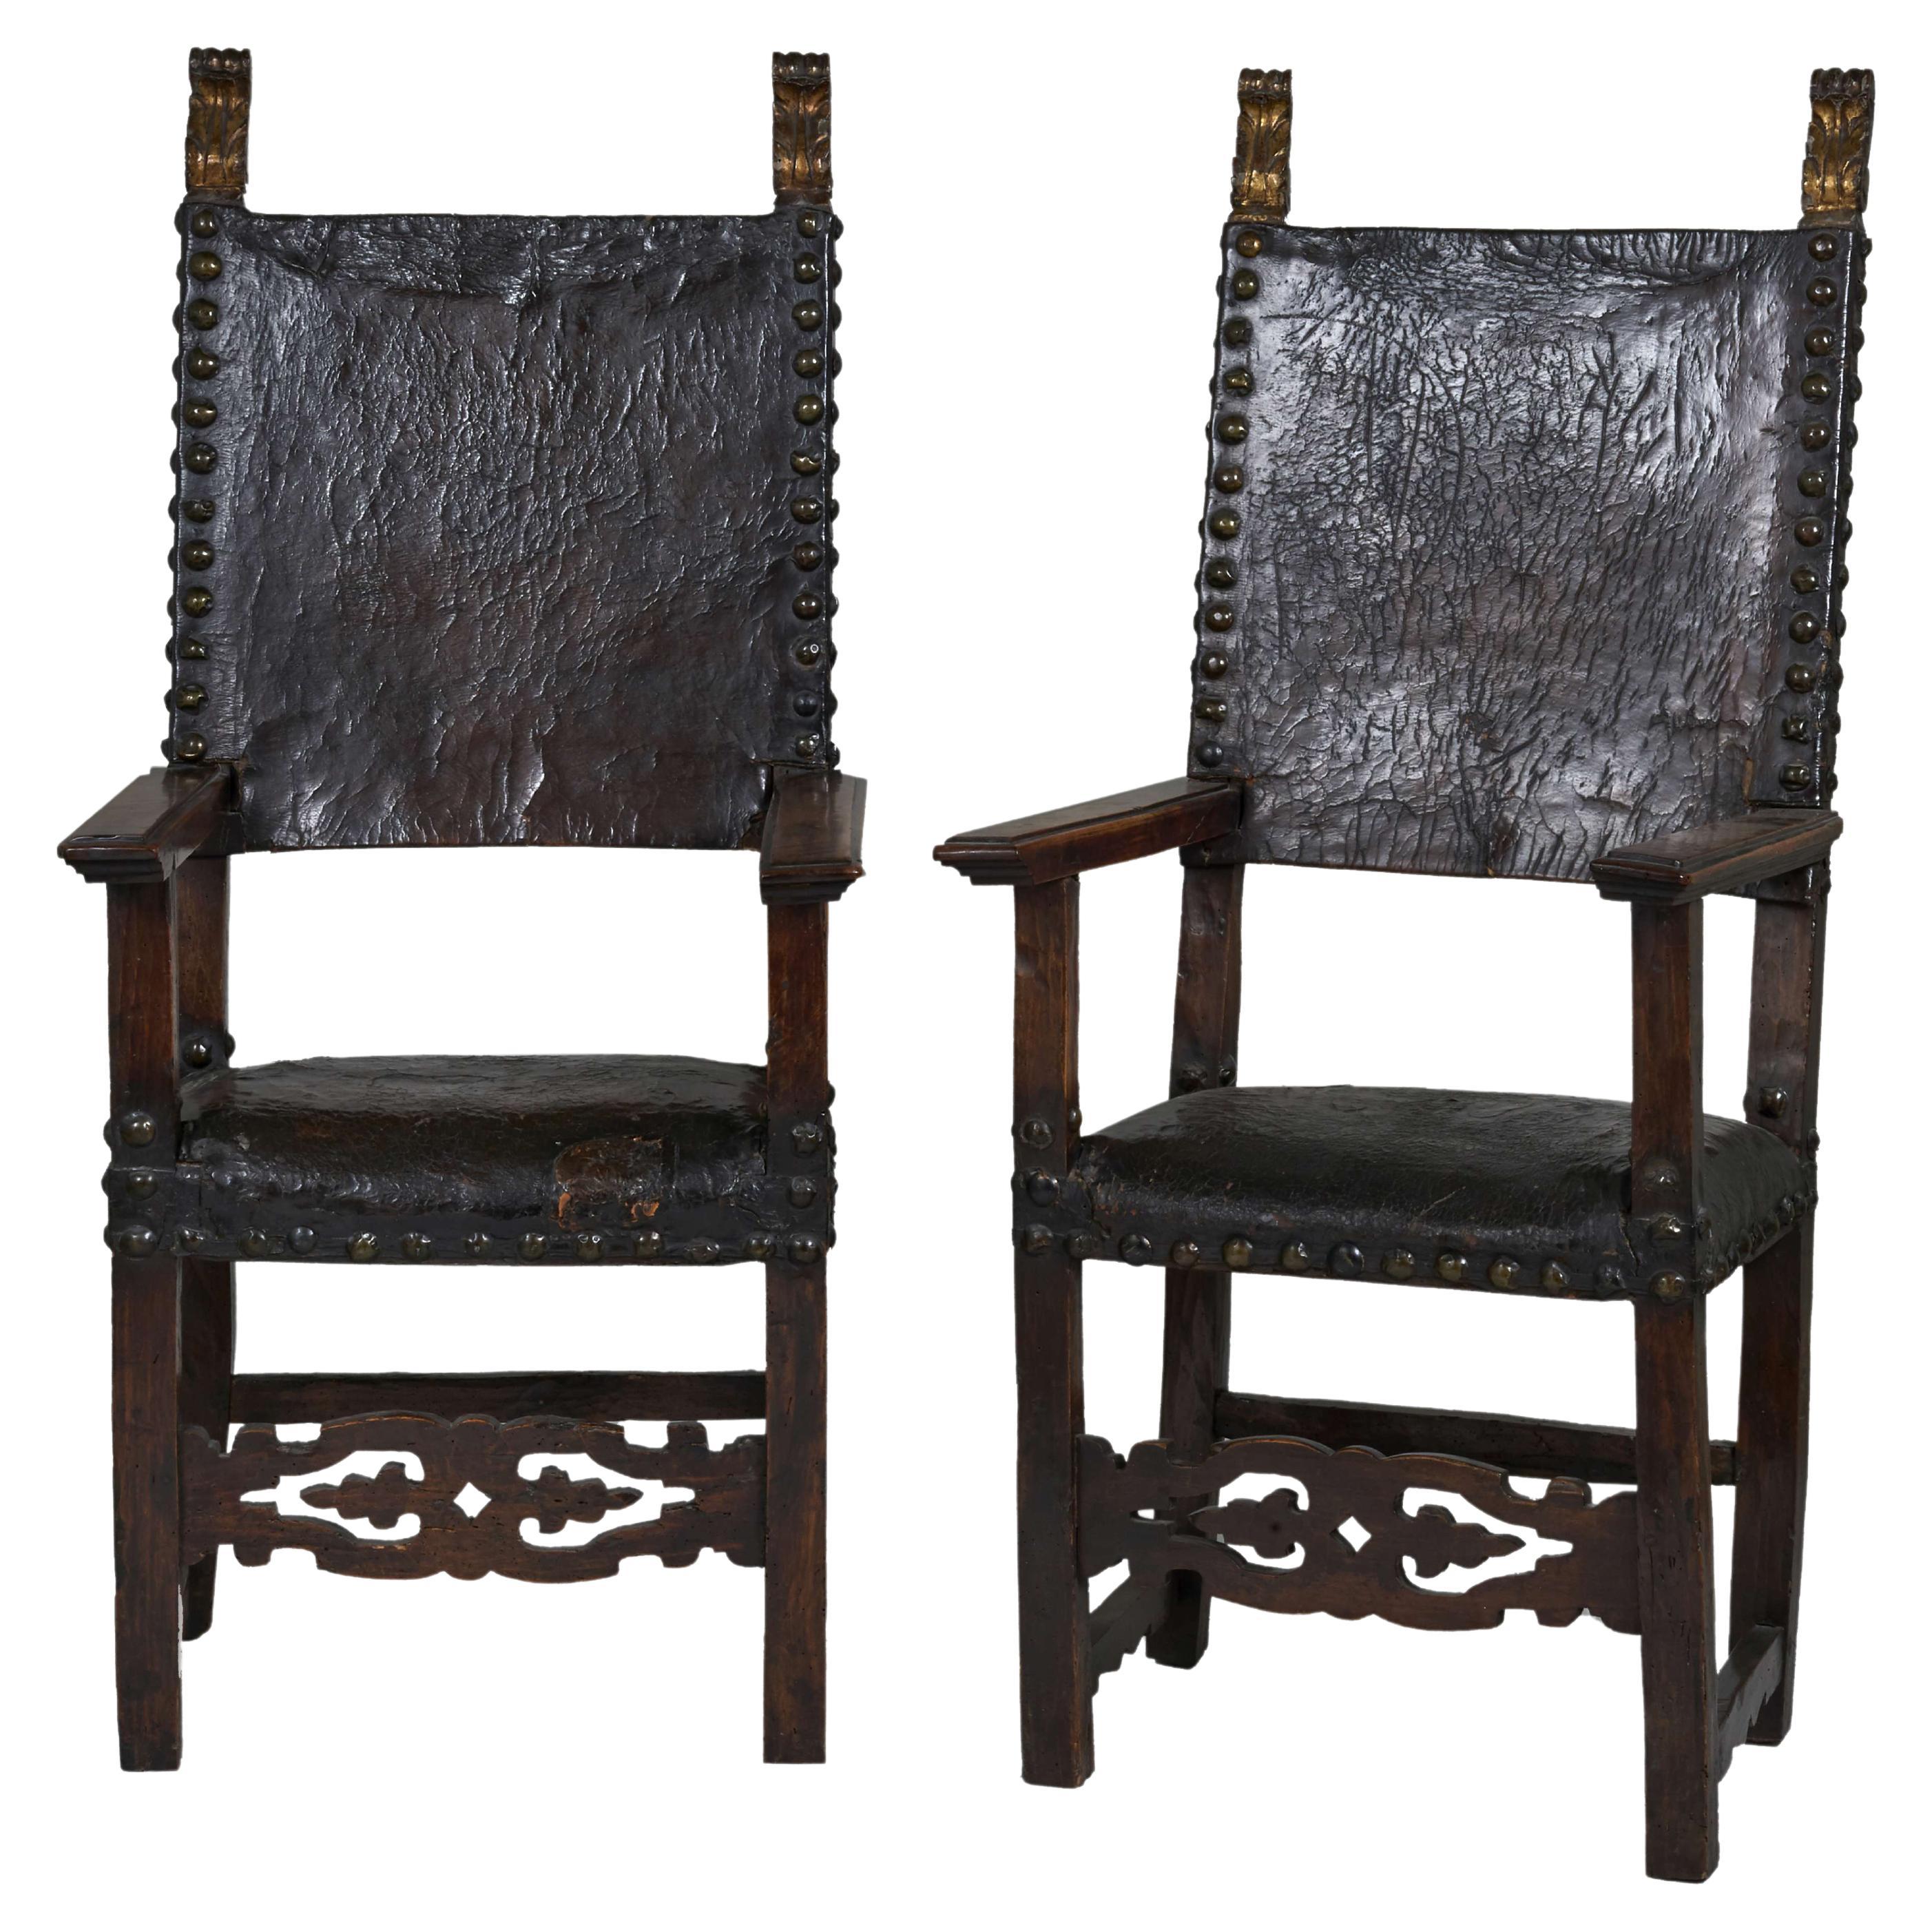 Set of Two 17th Century Spanish Chairs